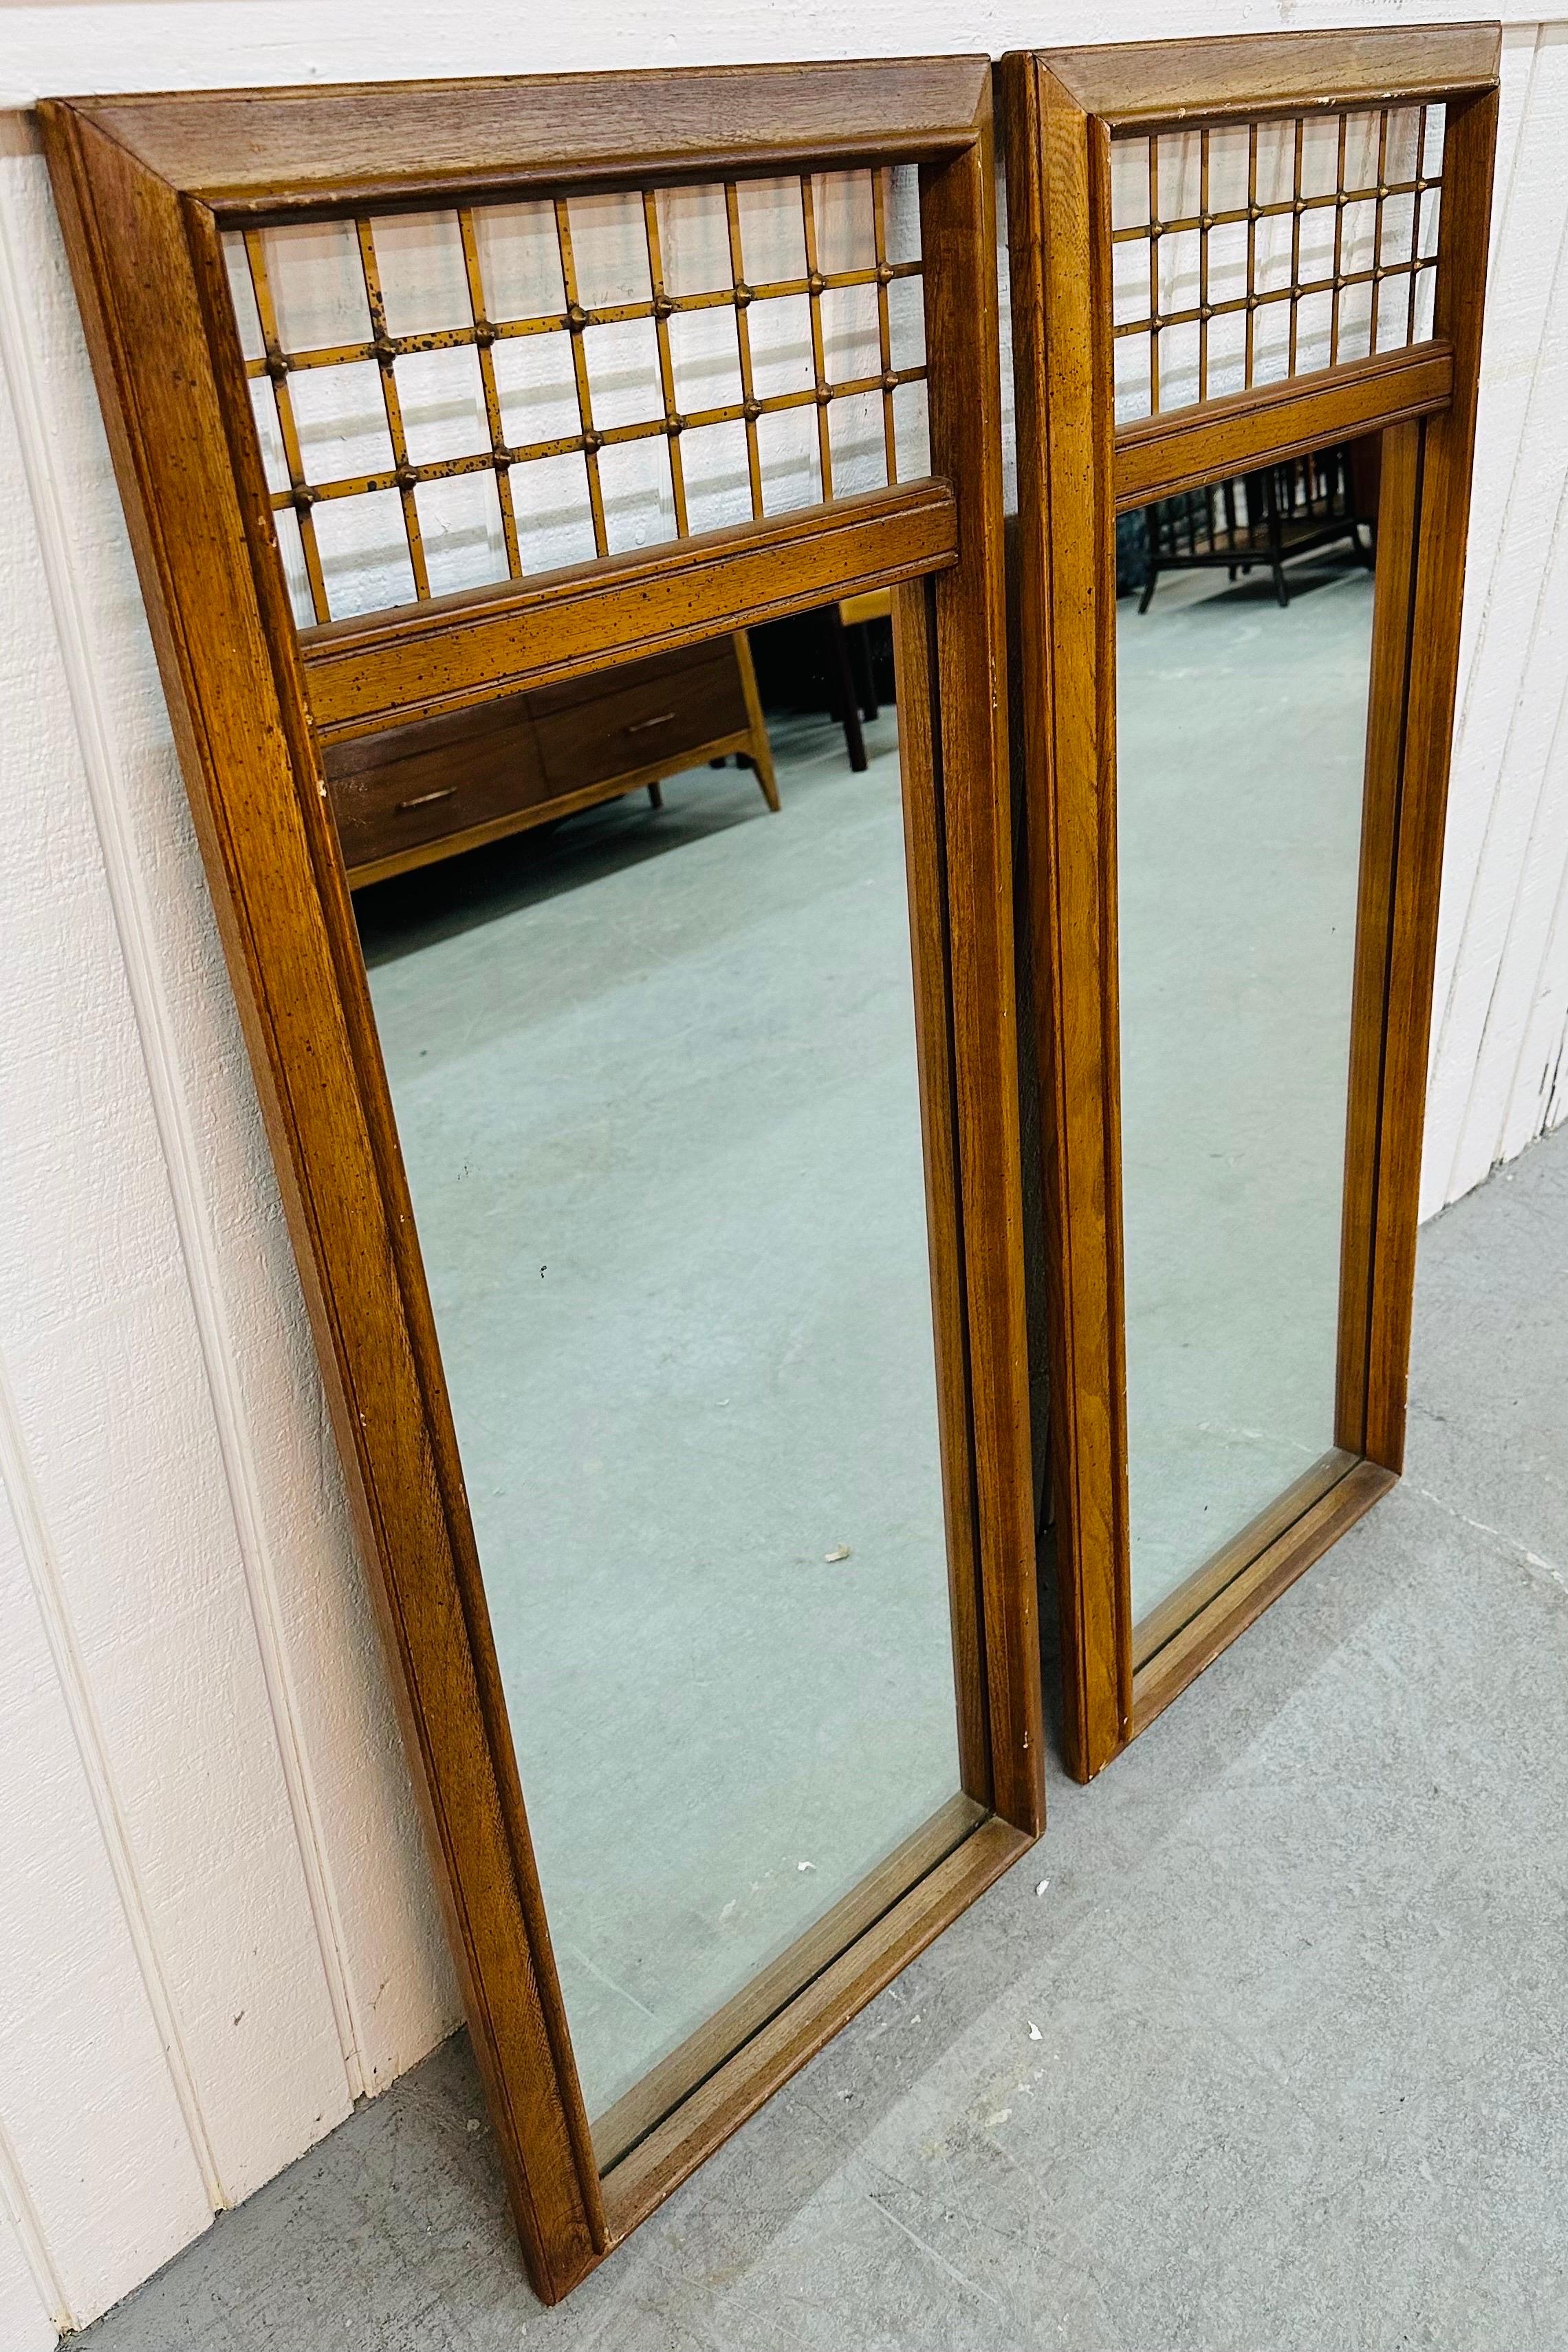 This listing is for a pair of Mid-Century Modern Walnut Wall Mirrors. Featuring a straight line rectangular design, brass fence along the top, and a beautiful walnut finish. This is an exceptional combination of quality and design!